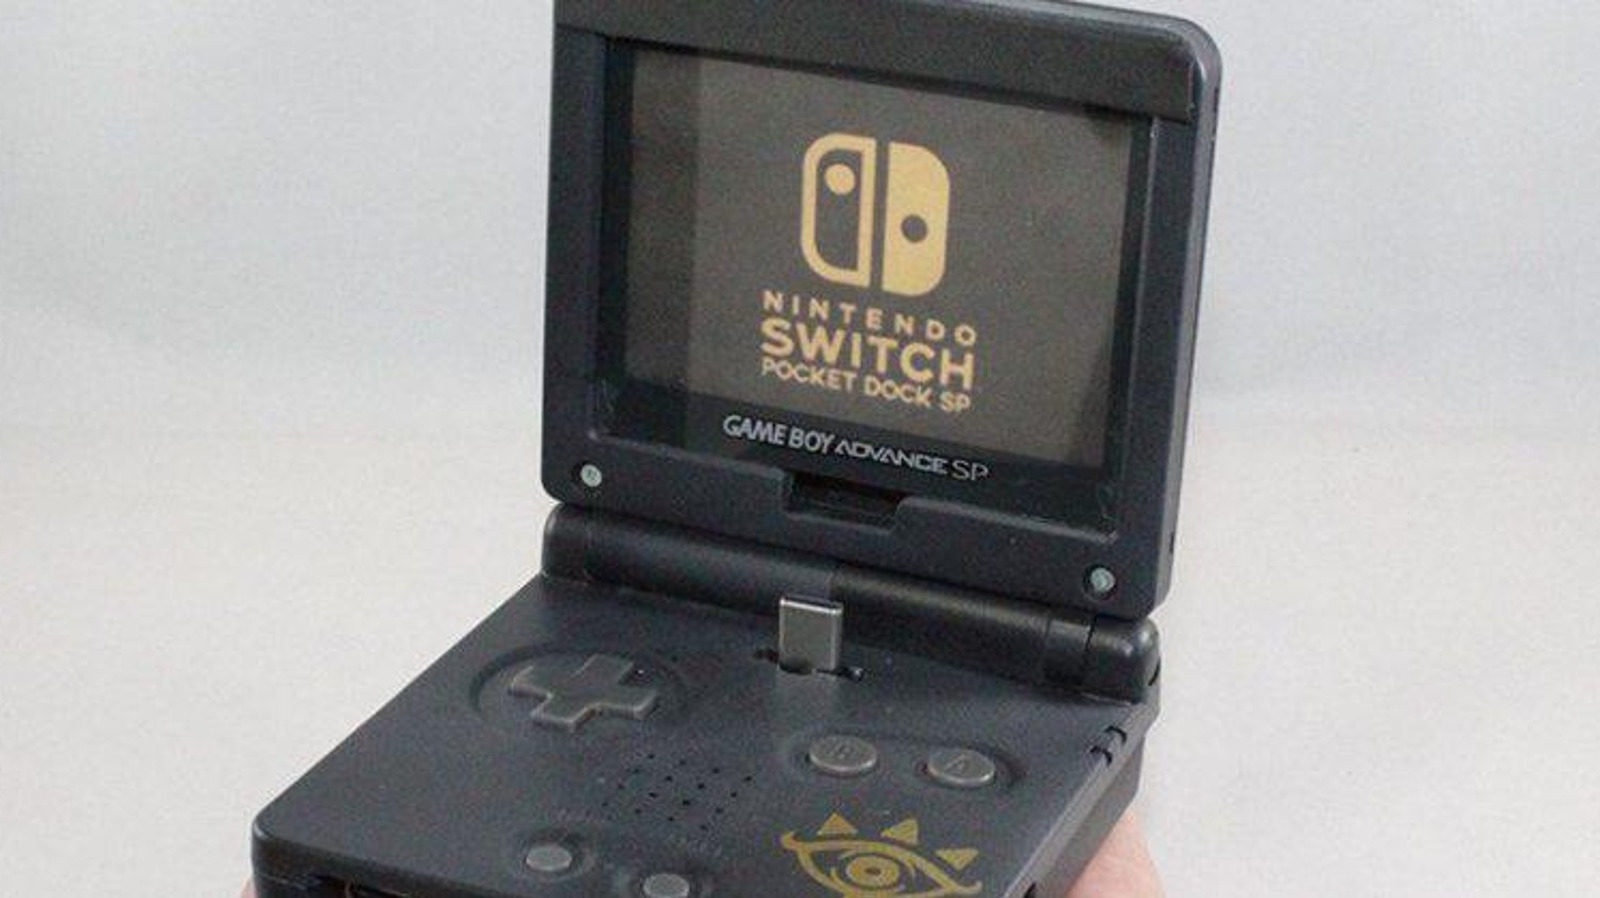 Nintendo Switch Dock Built From Old Game Boy Advance SP